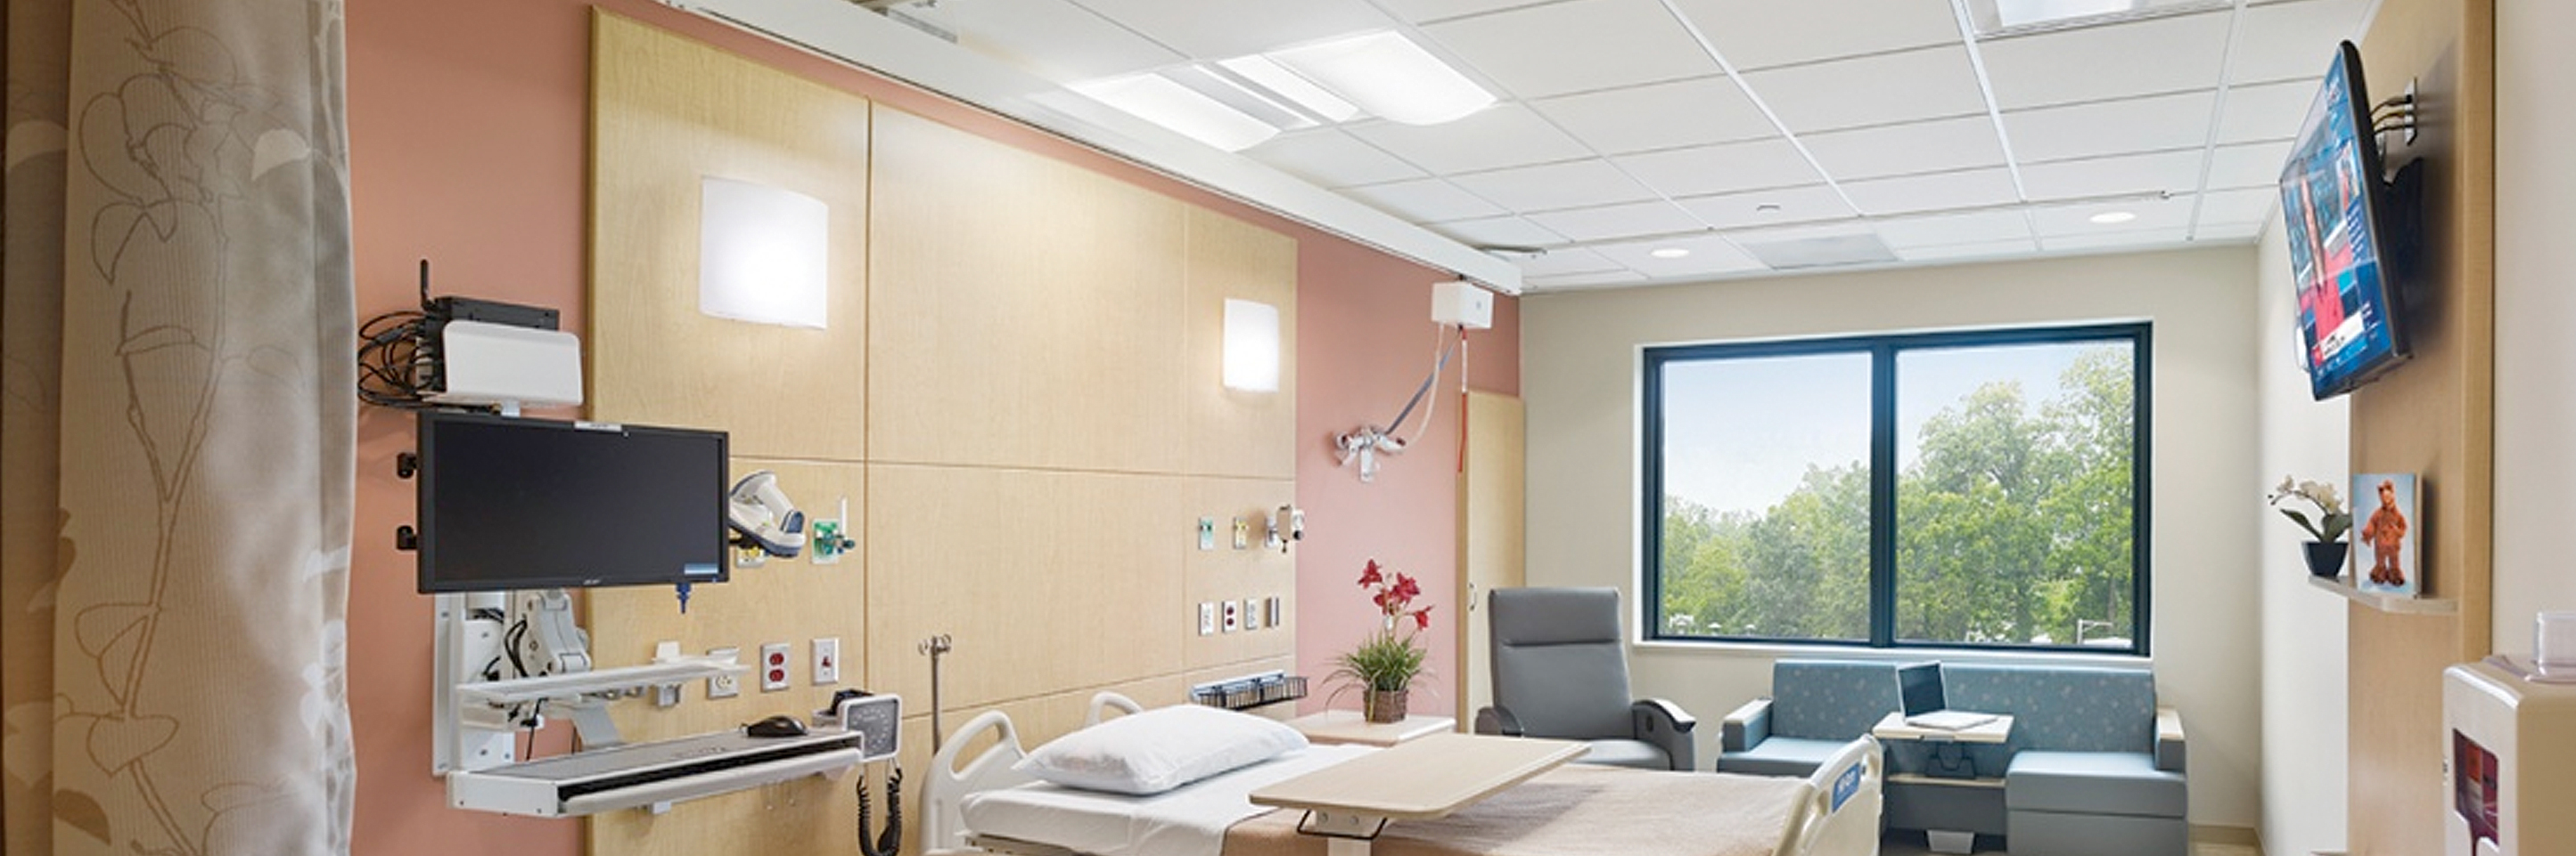 Add comfort to hospital patient rooms with unity lighting